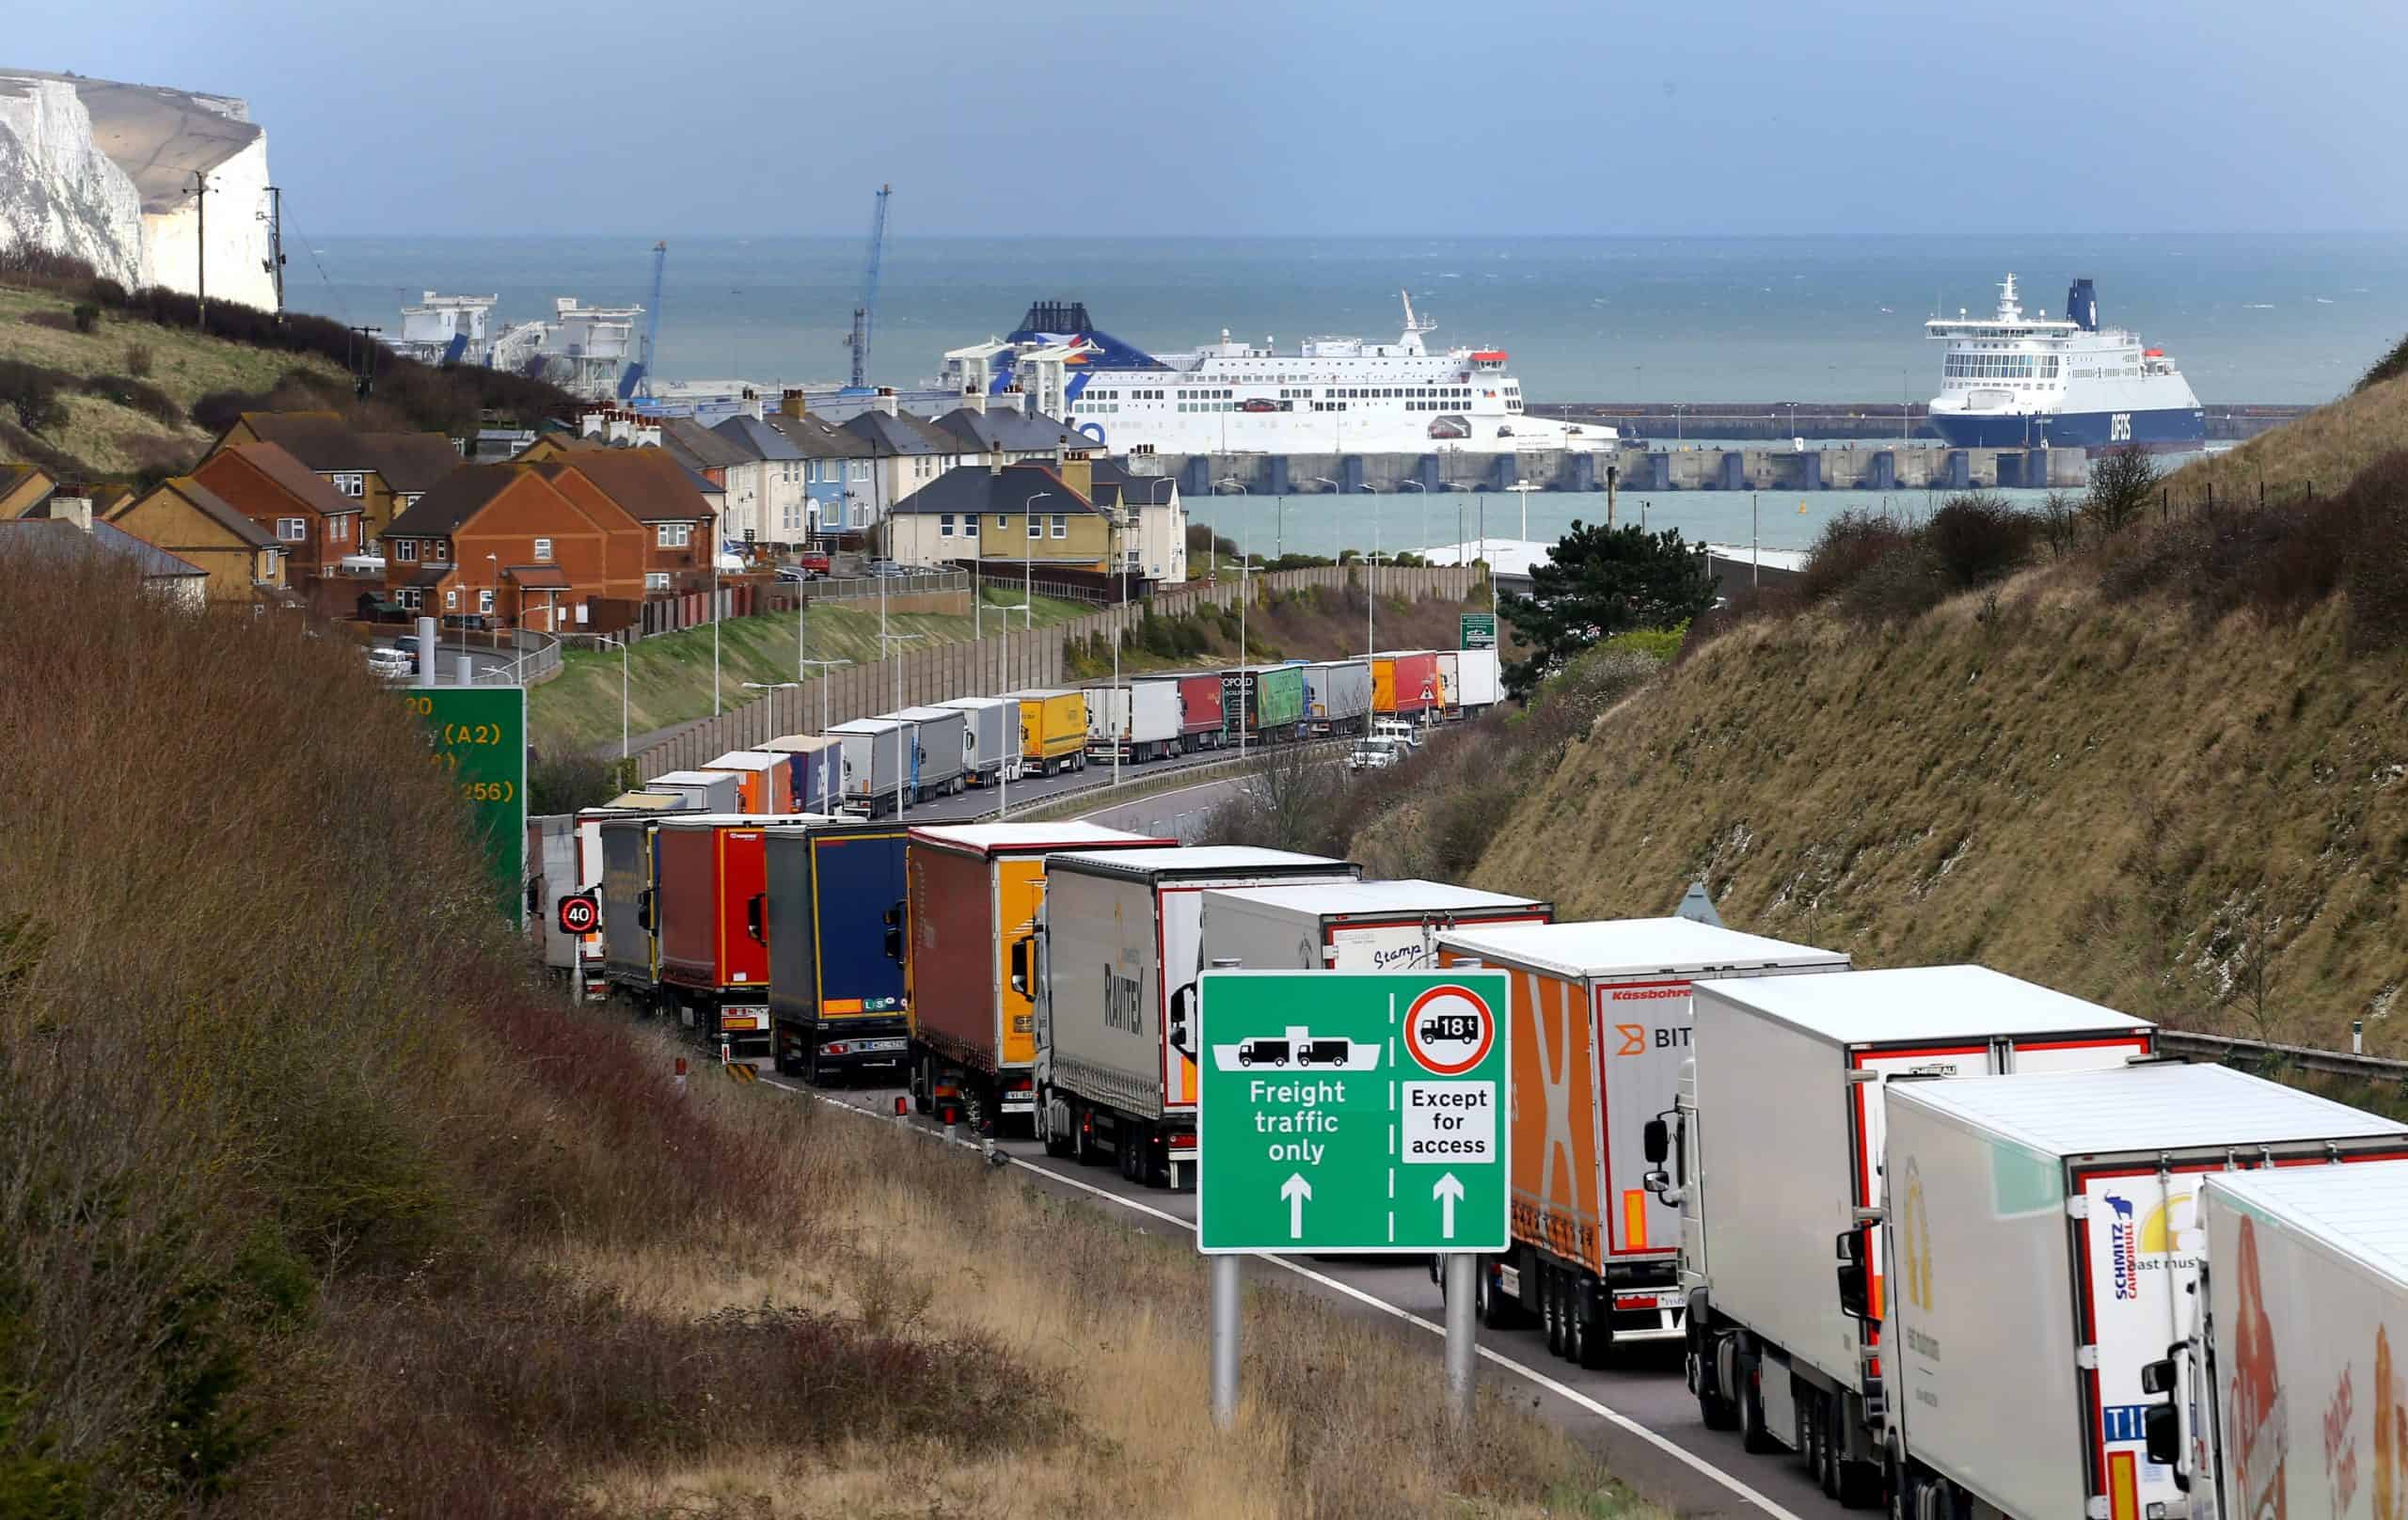 Scheme to hire 50,000 Brexit customs officers ‘is funding staff poaching’